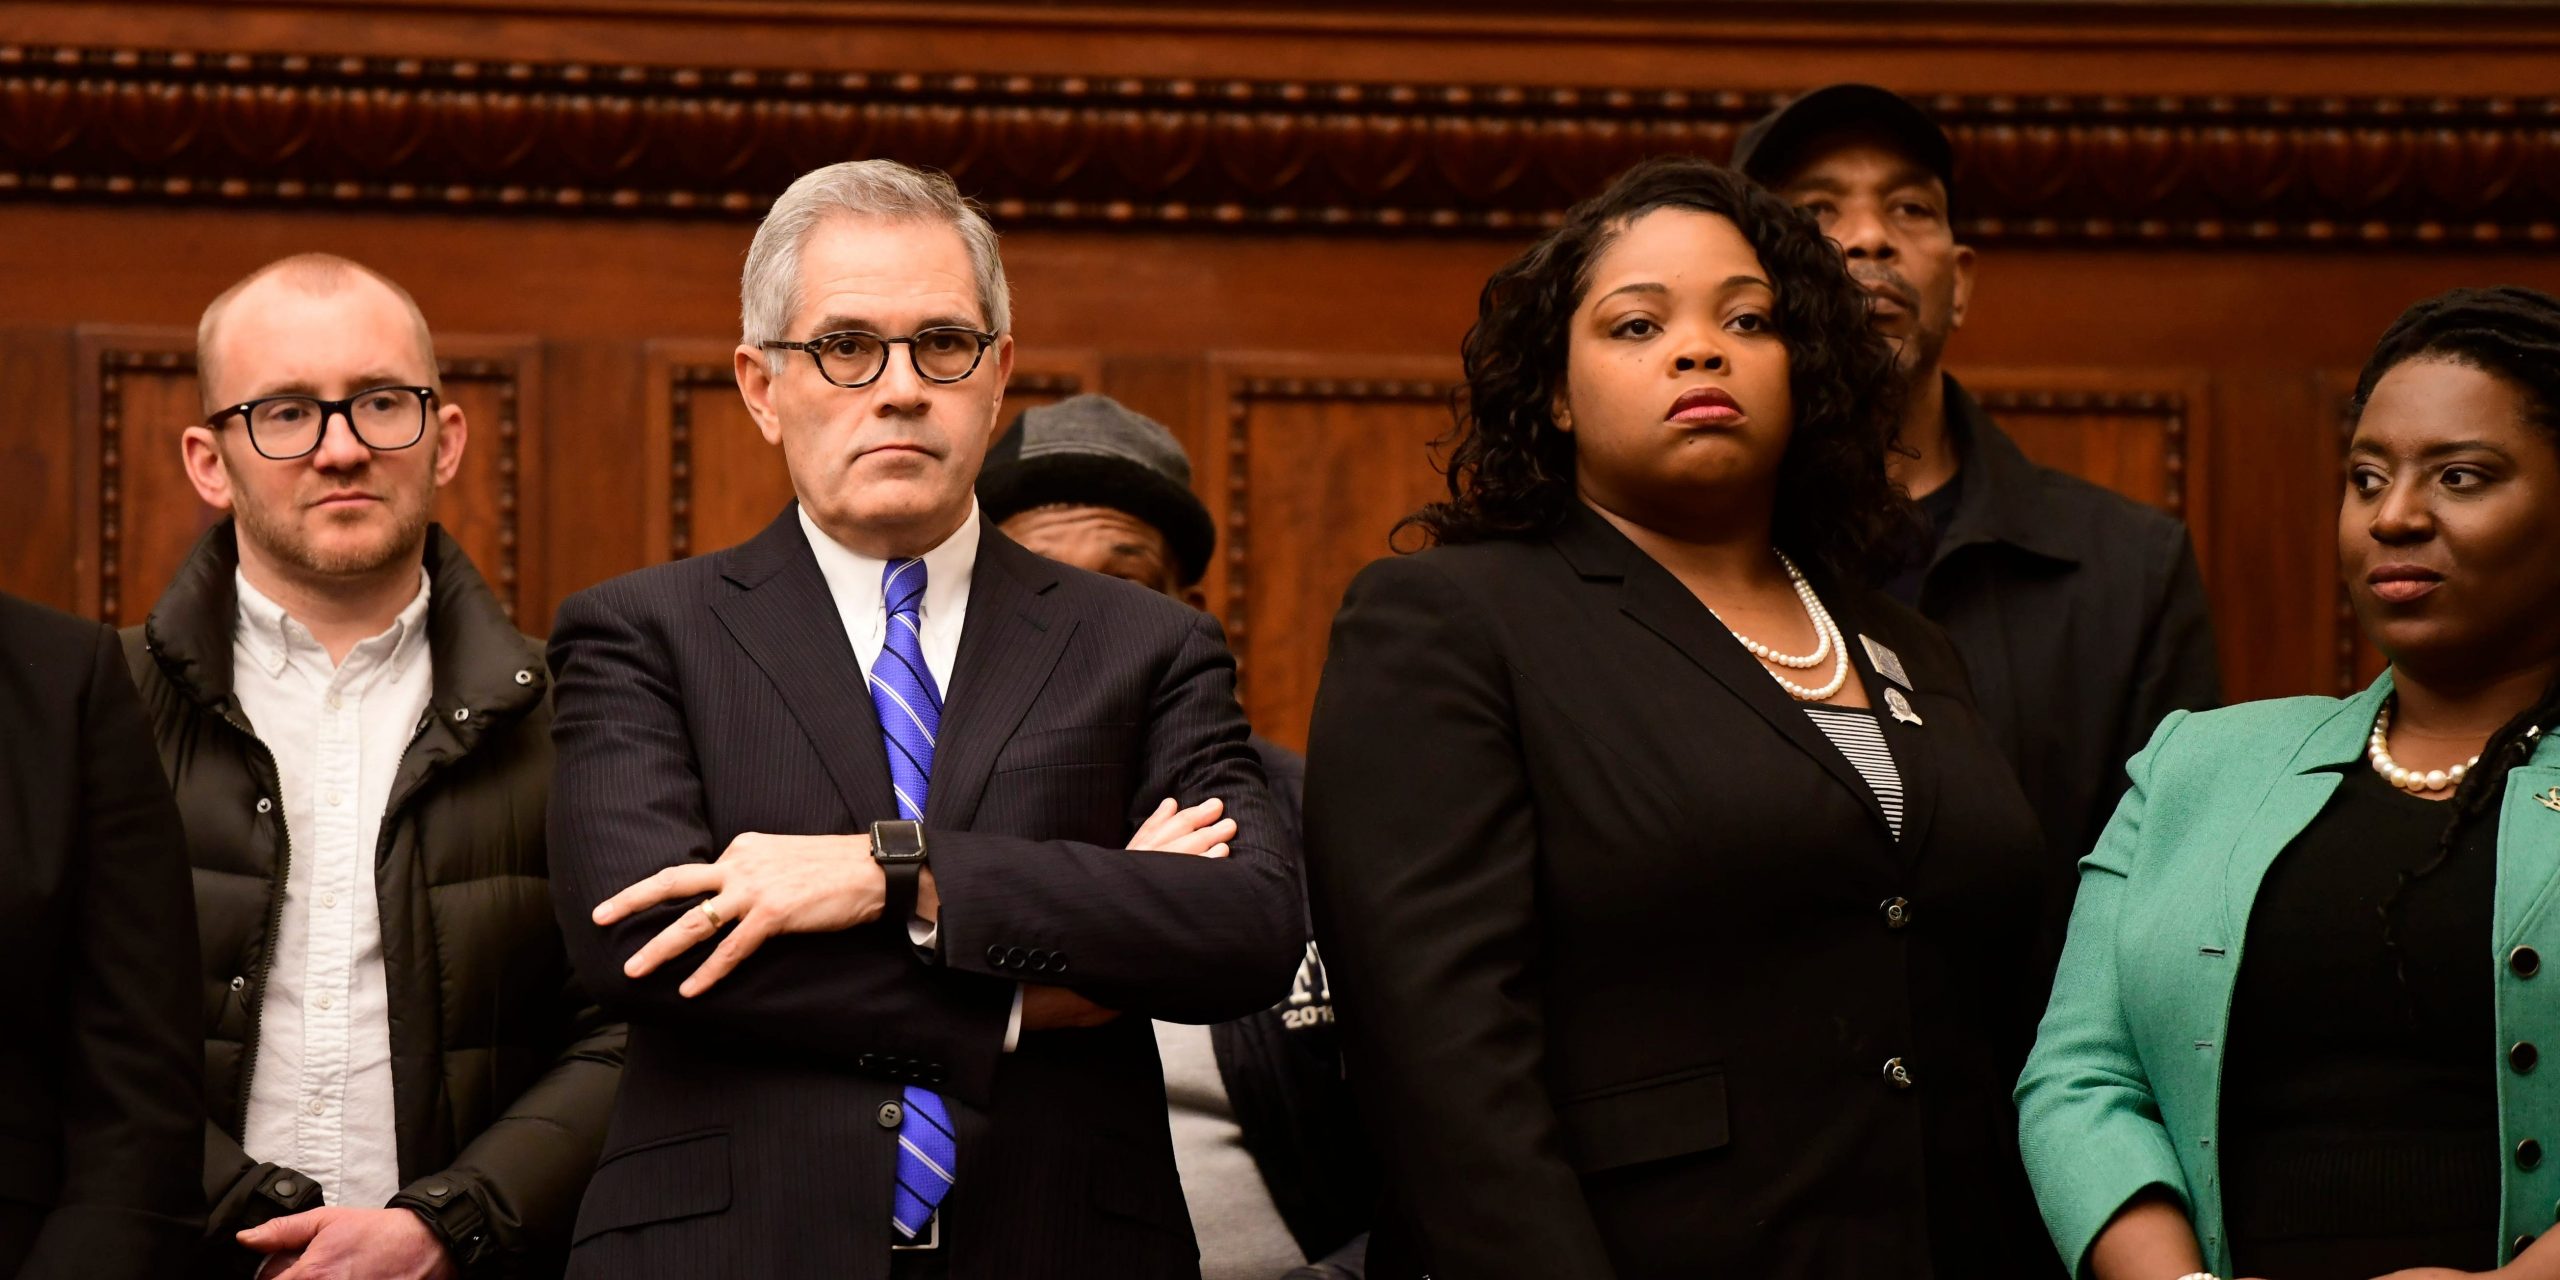 Larry Krasner with arms crossed.